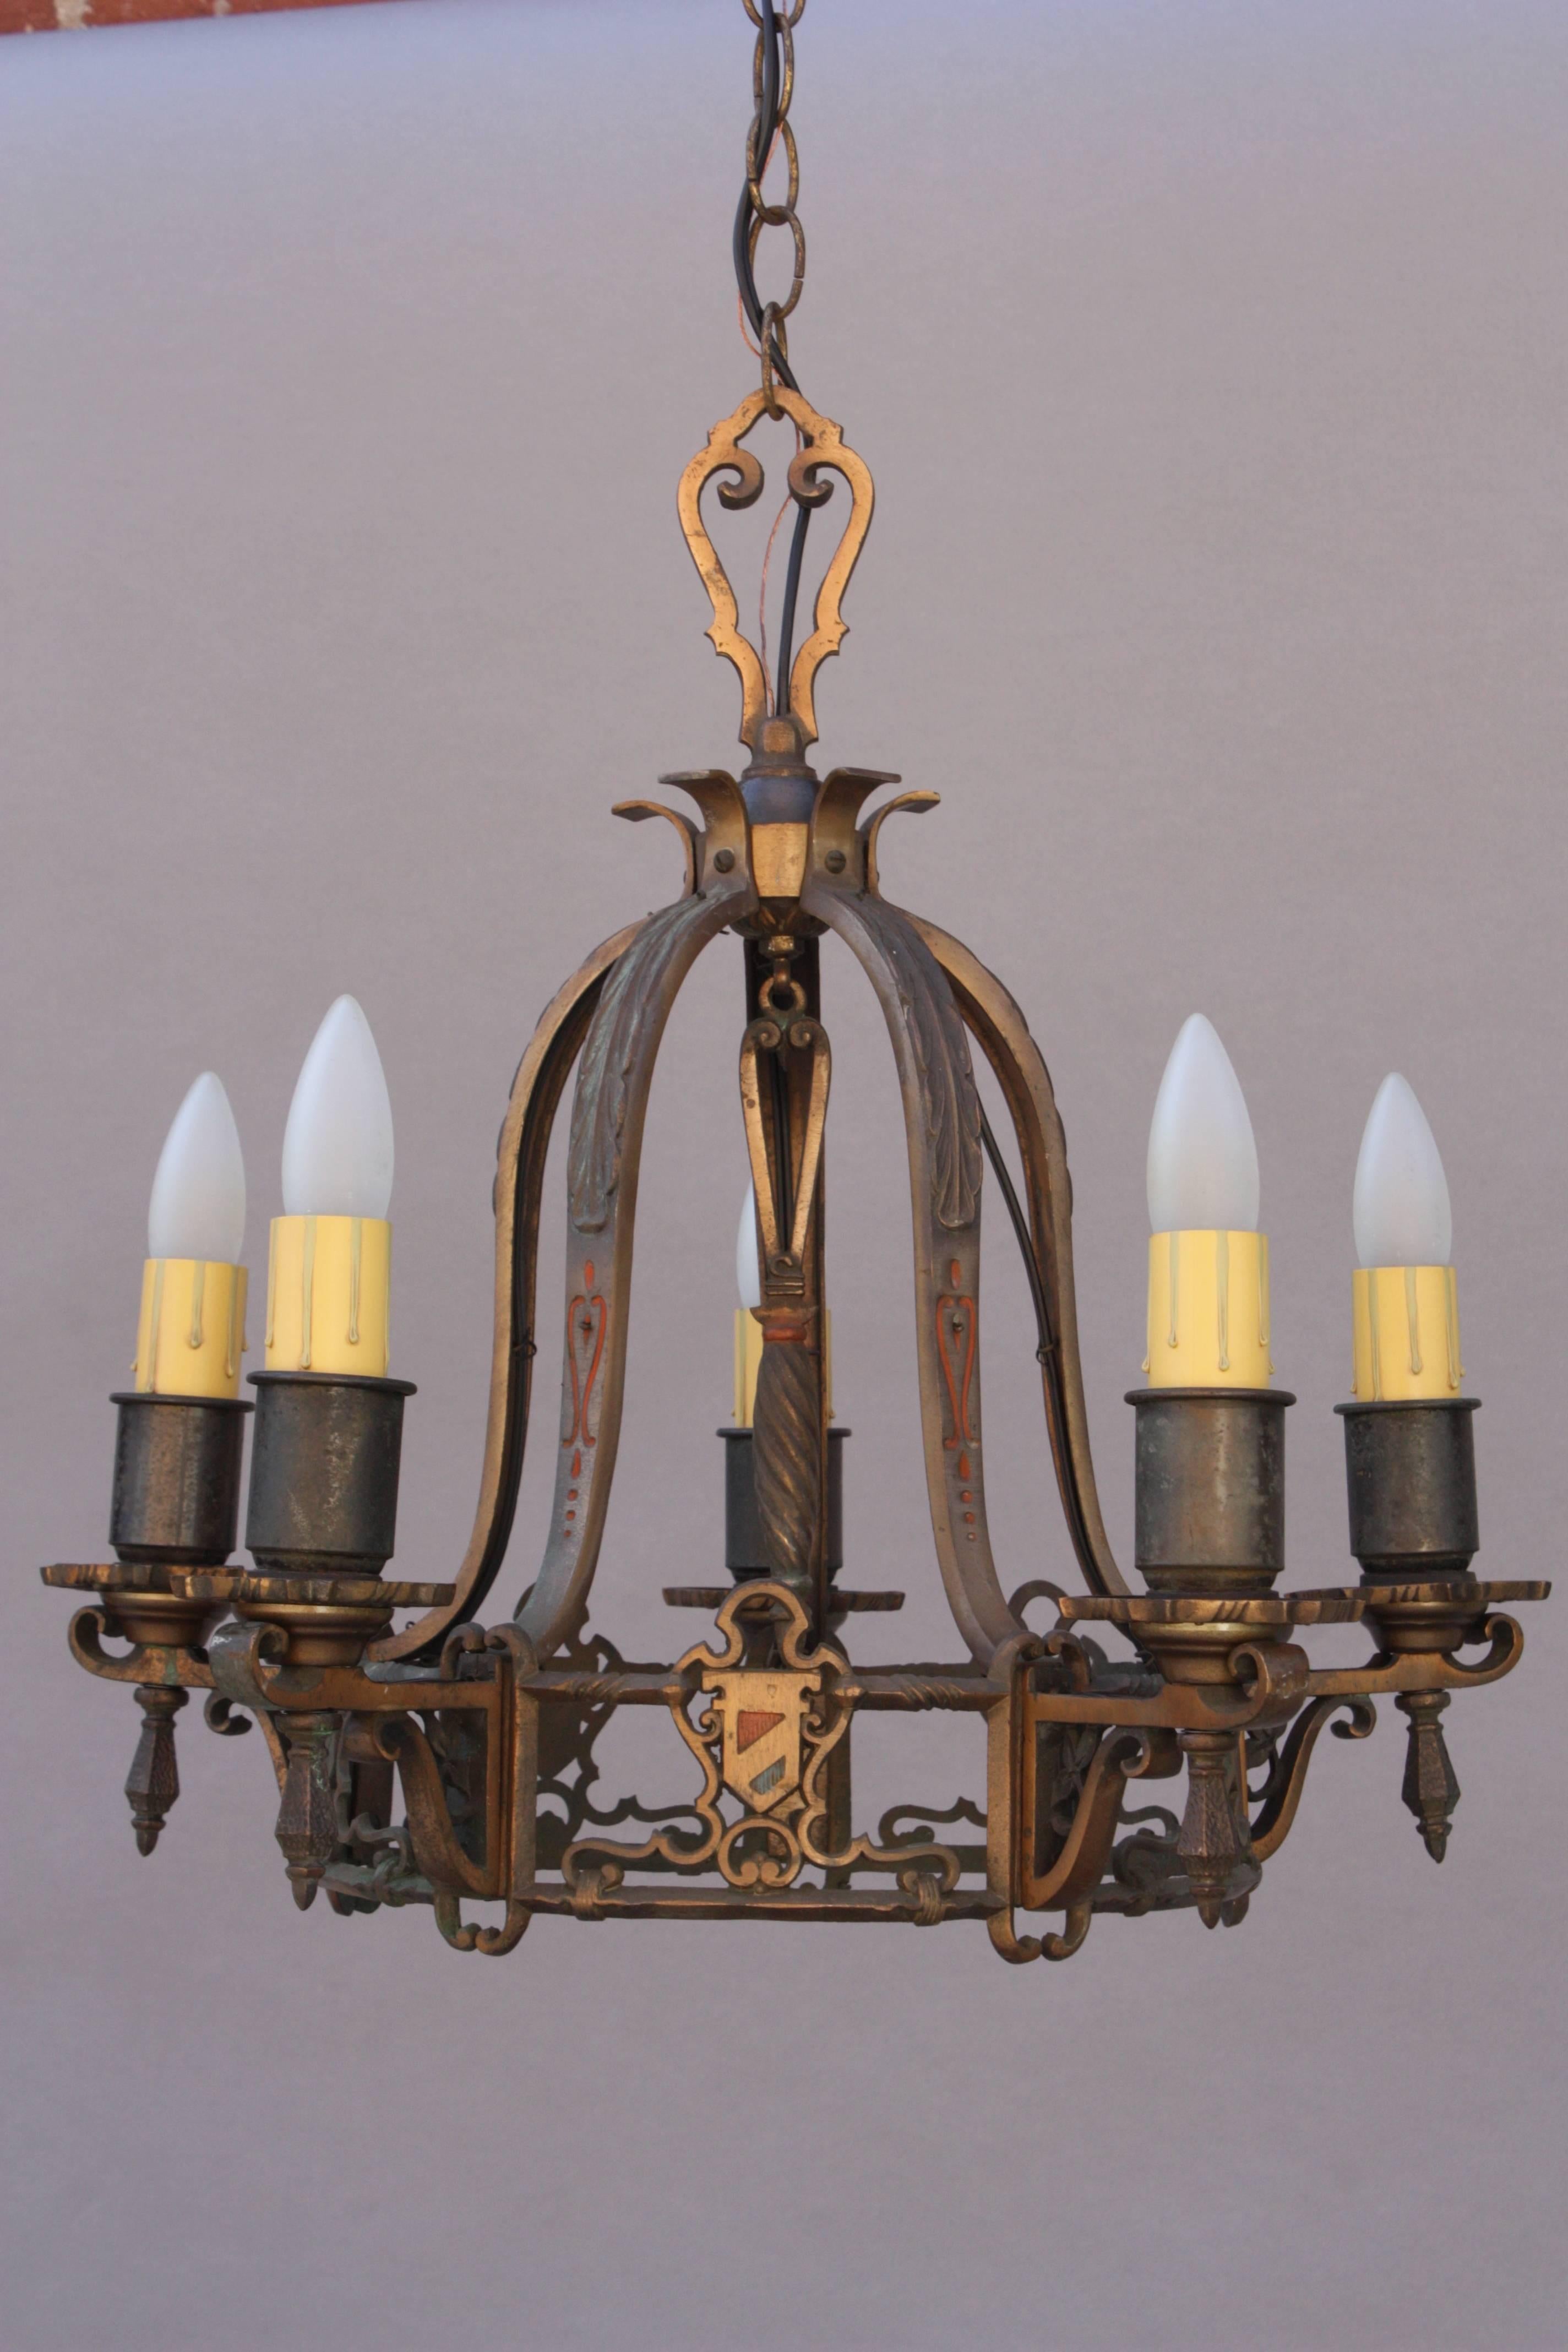 Cast brass chandelier with original polychrome accents, circa 1920s.